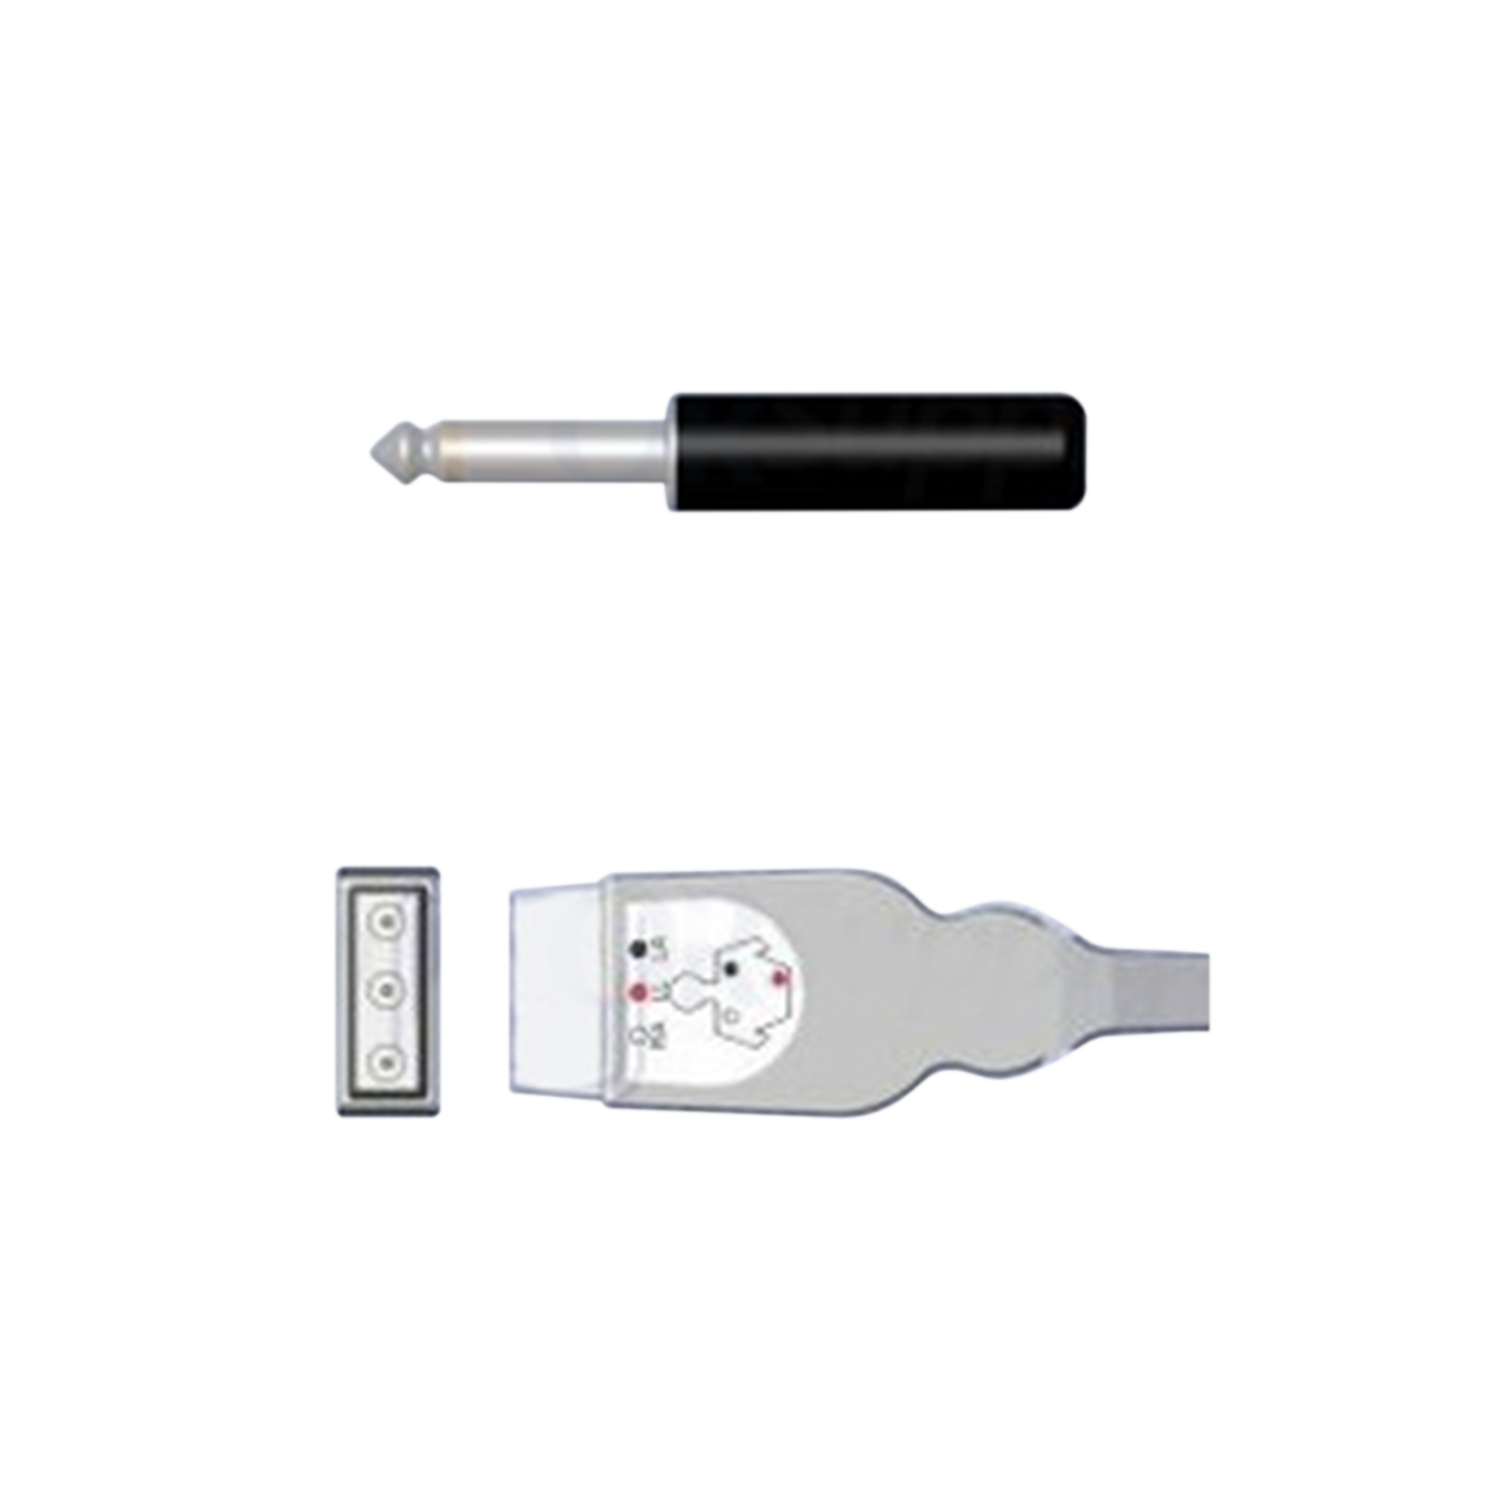 Medtronic Physio-Control ECG Cable for Lifepak Defibrillators, 3-Lead AHA Safety Din